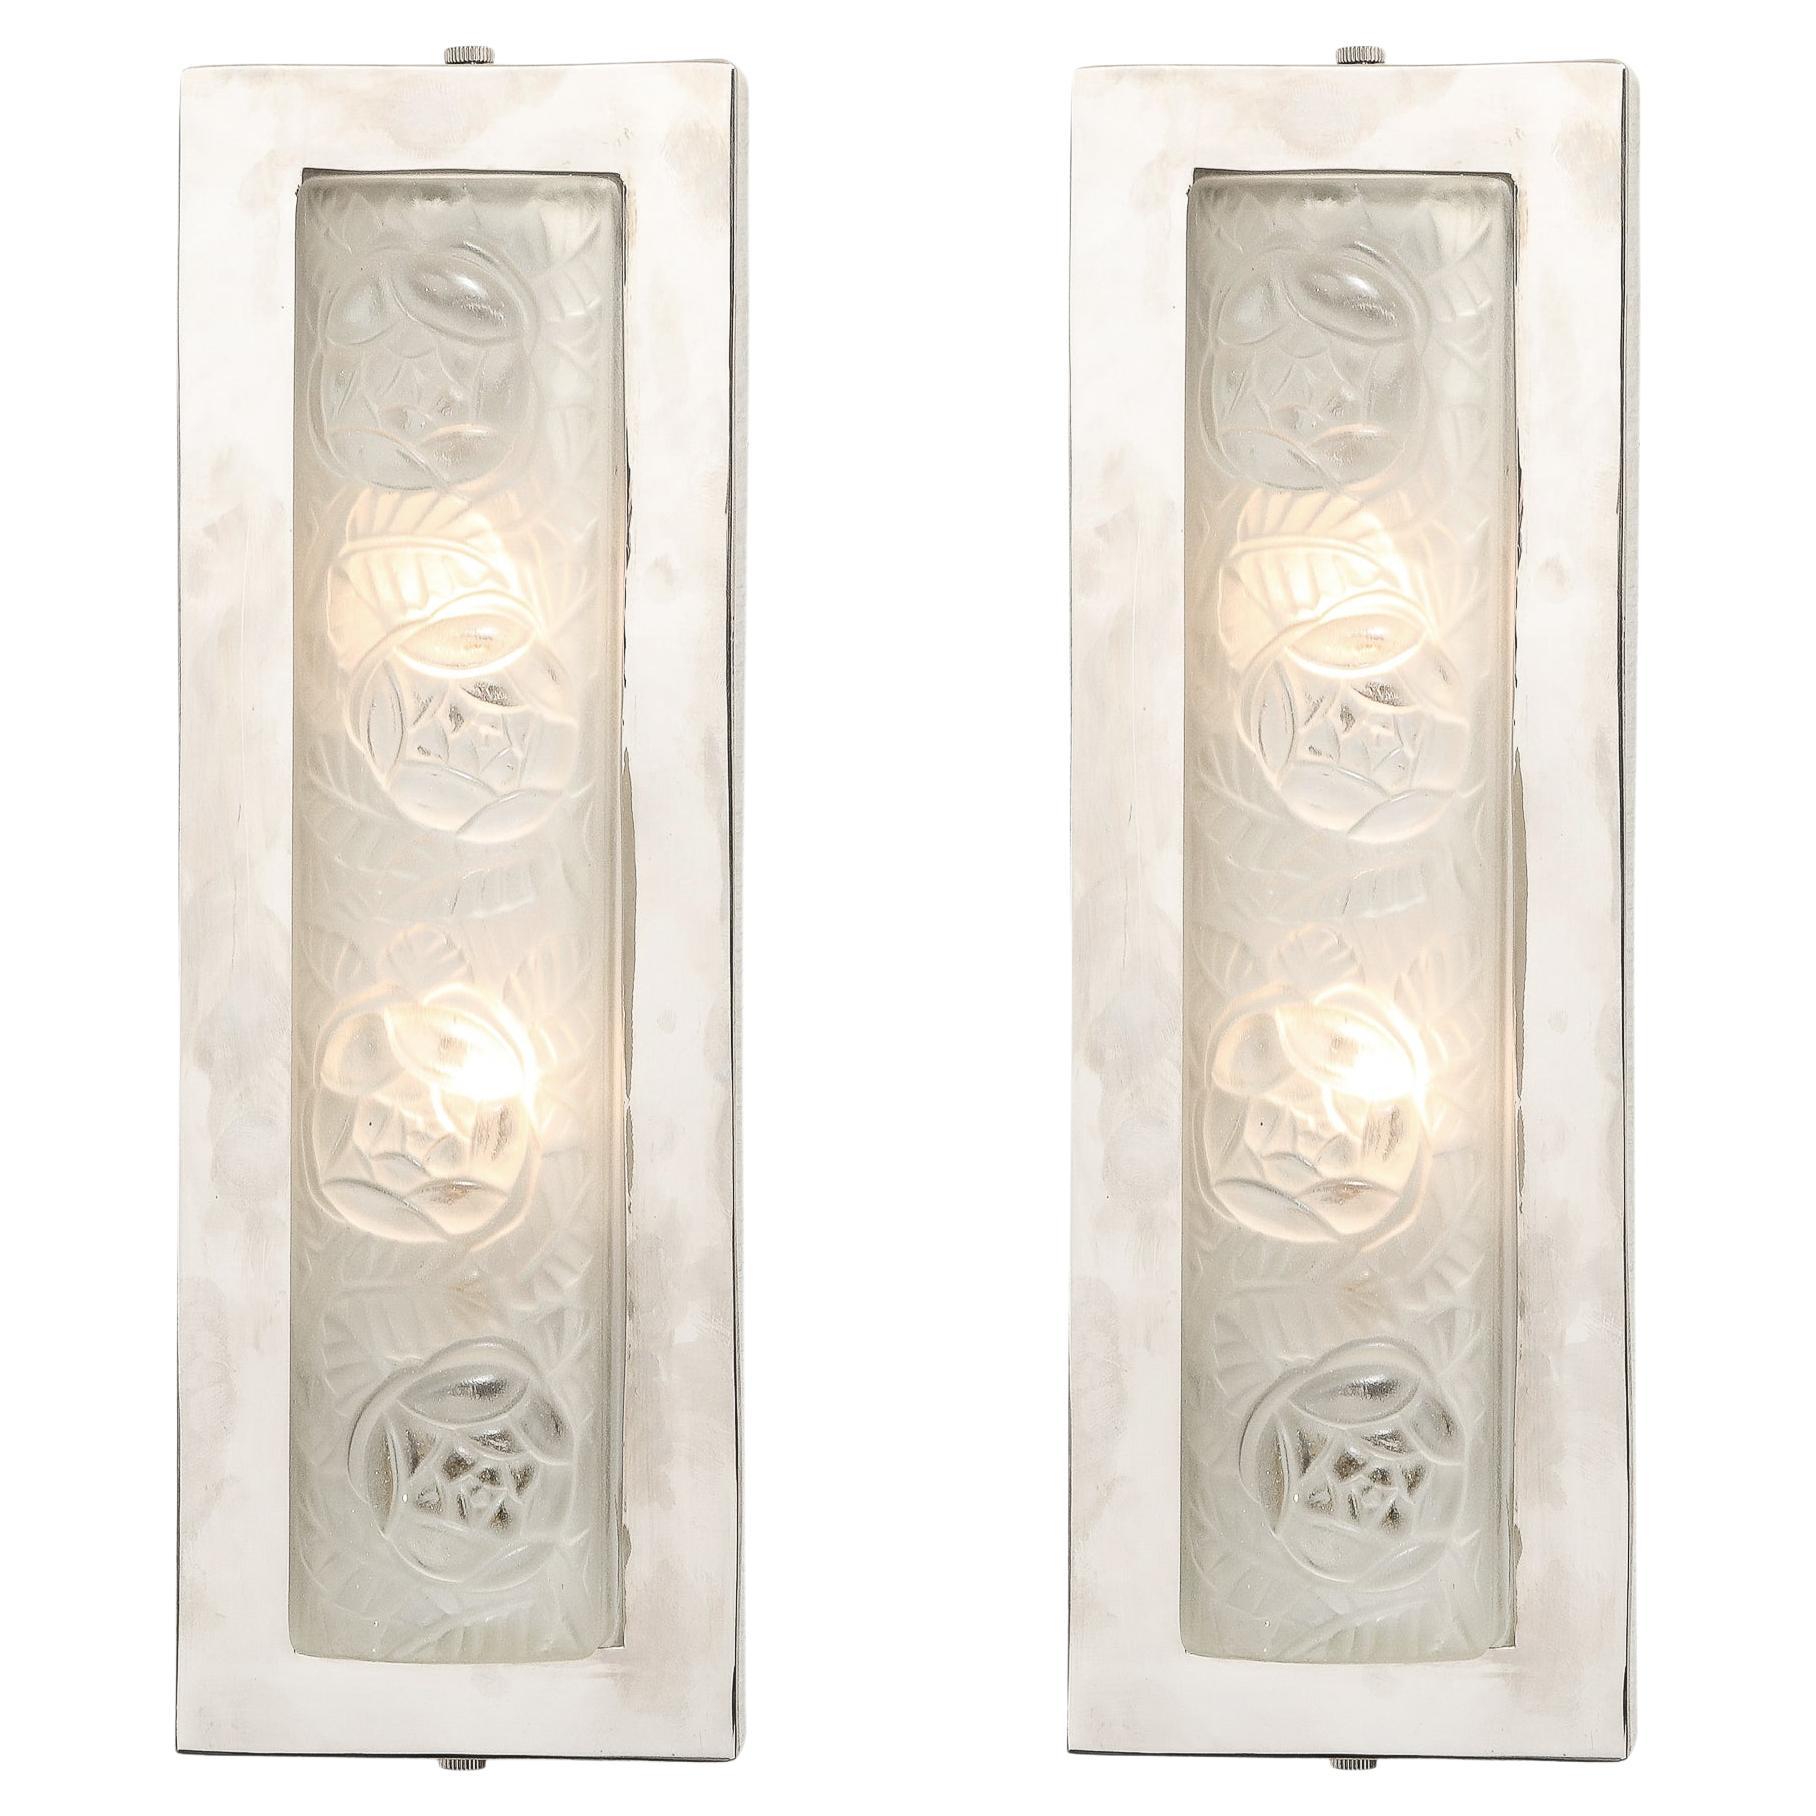 Pair of Art Deco Frosted Glass & Chrome Rectangular Sconces w/ Rose Motifs